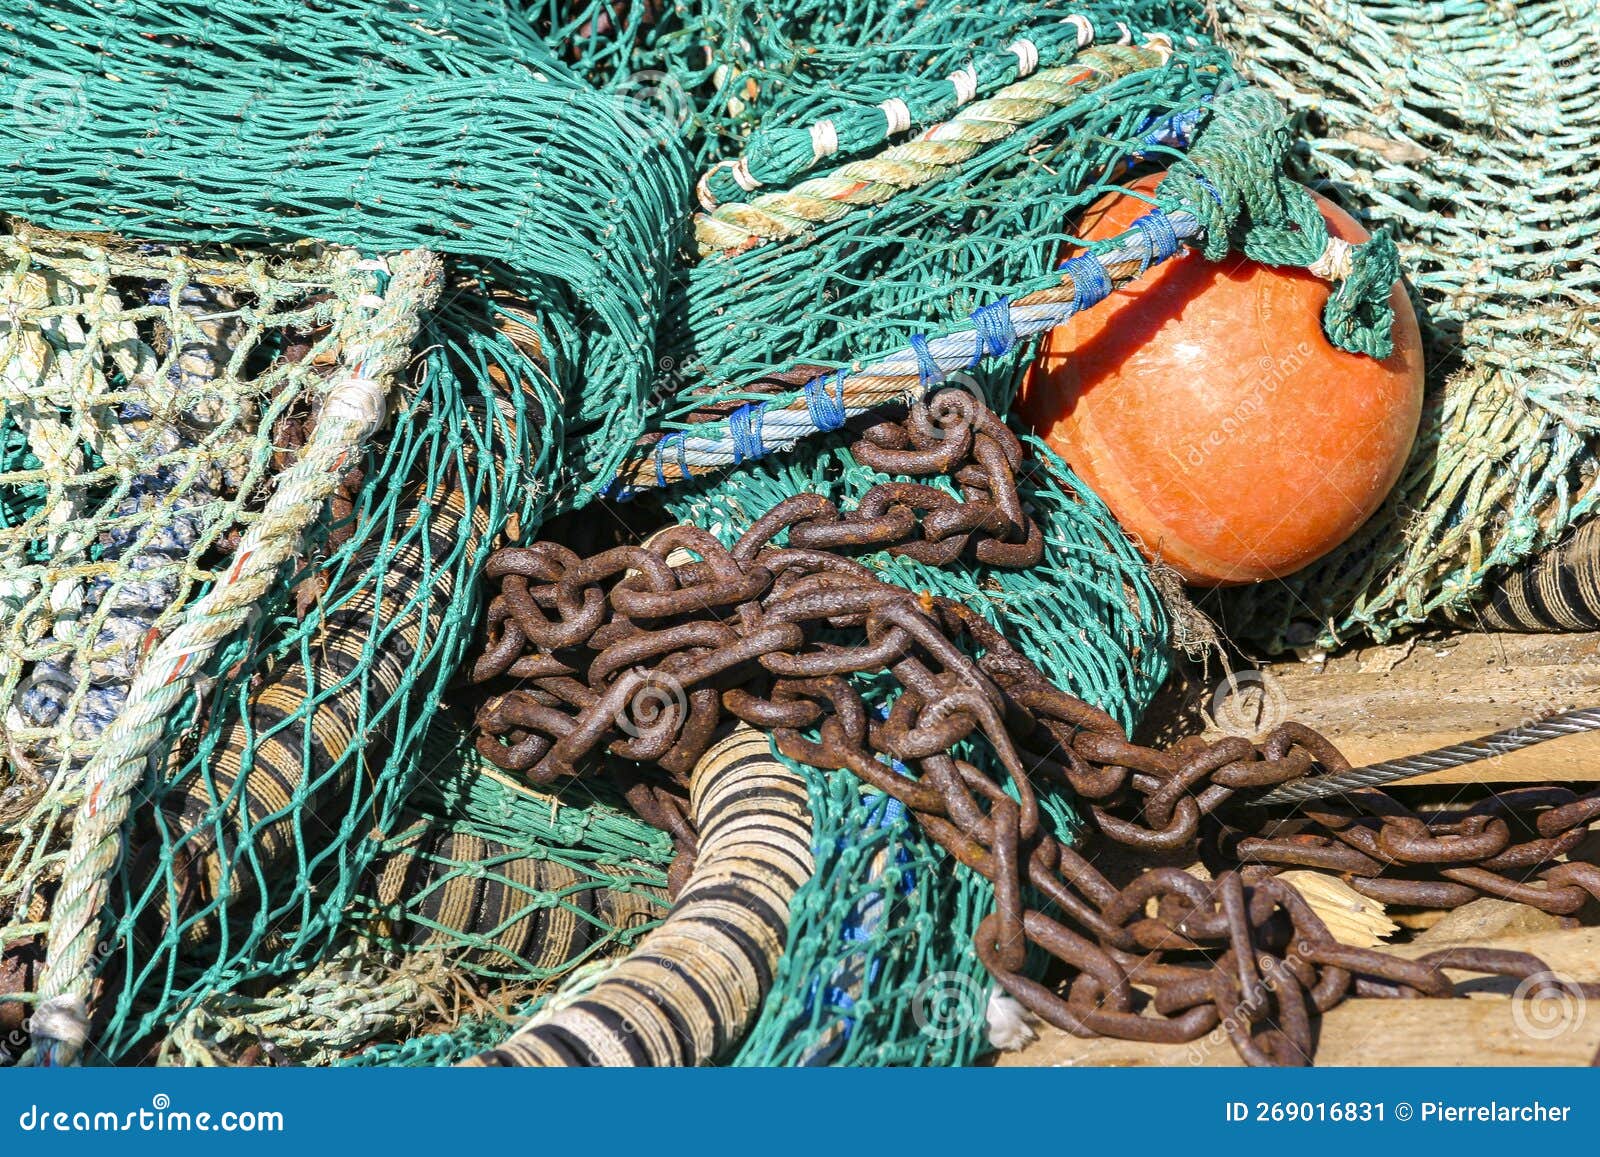 Close Up of Multi Coloured Artisanal Fishing Nets with Floats on the  Waterfront Stock Image - Image of fishingnet, quay: 269016831